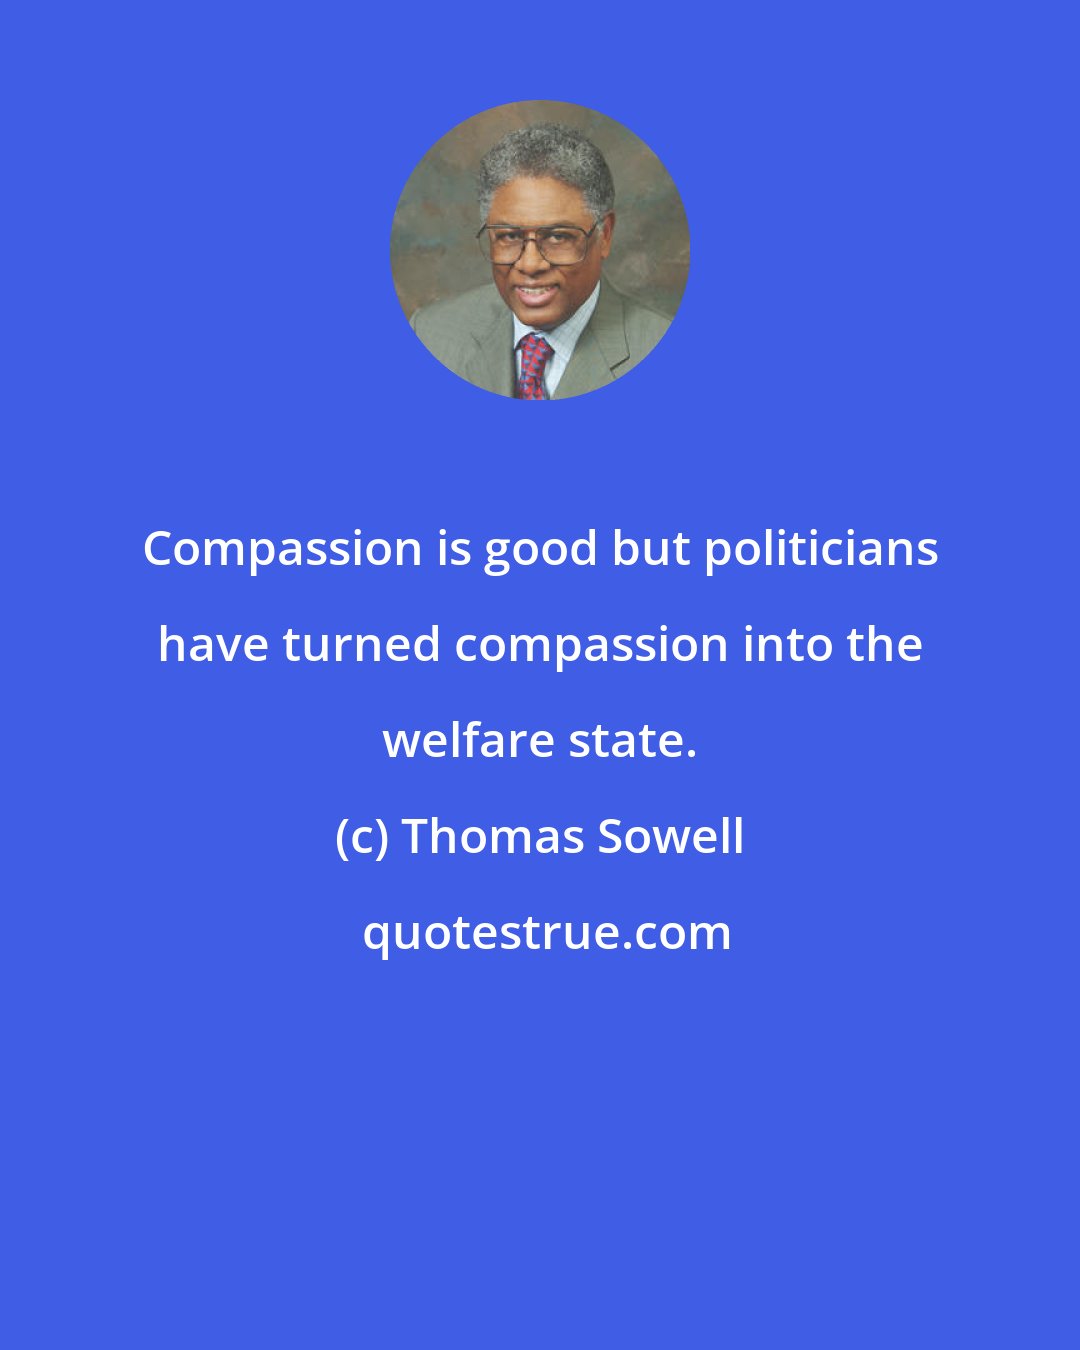 Thomas Sowell: Compassion is good but politicians have turned compassion into the welfare state.